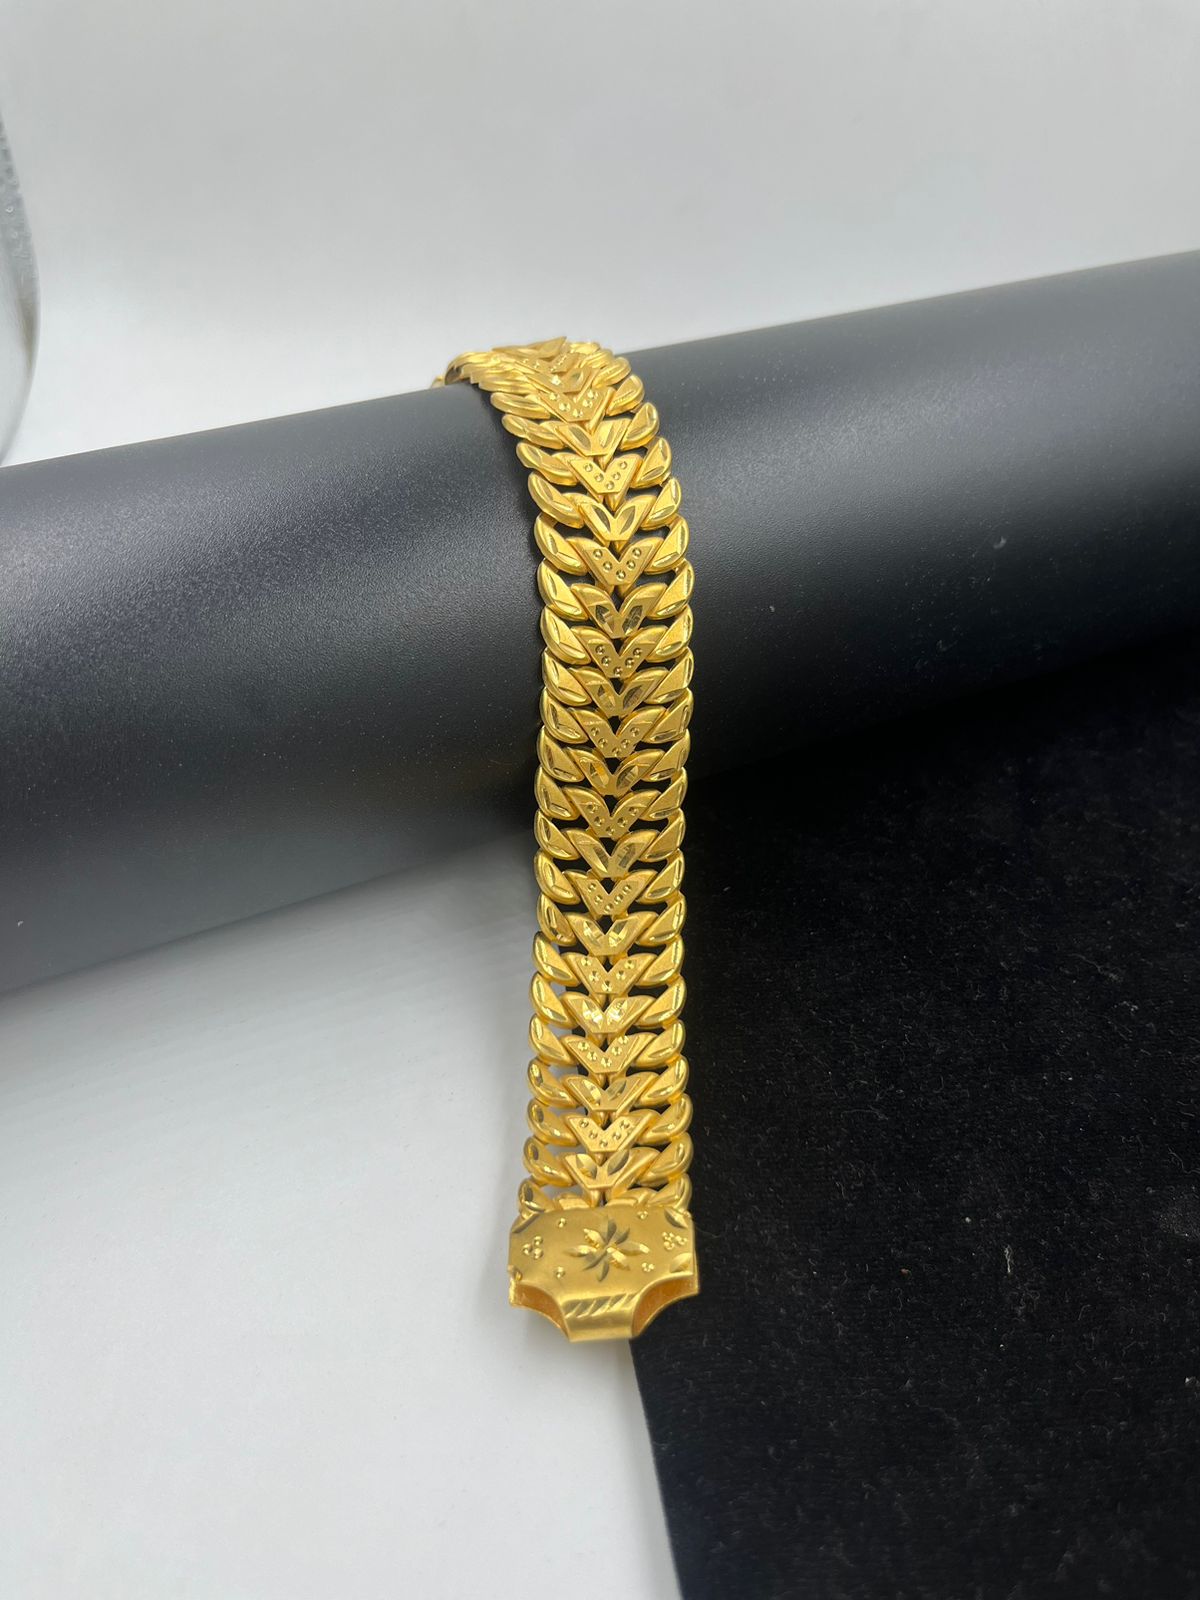 Gold Link Bracelet Available For Immediate Sale At Sotheby's